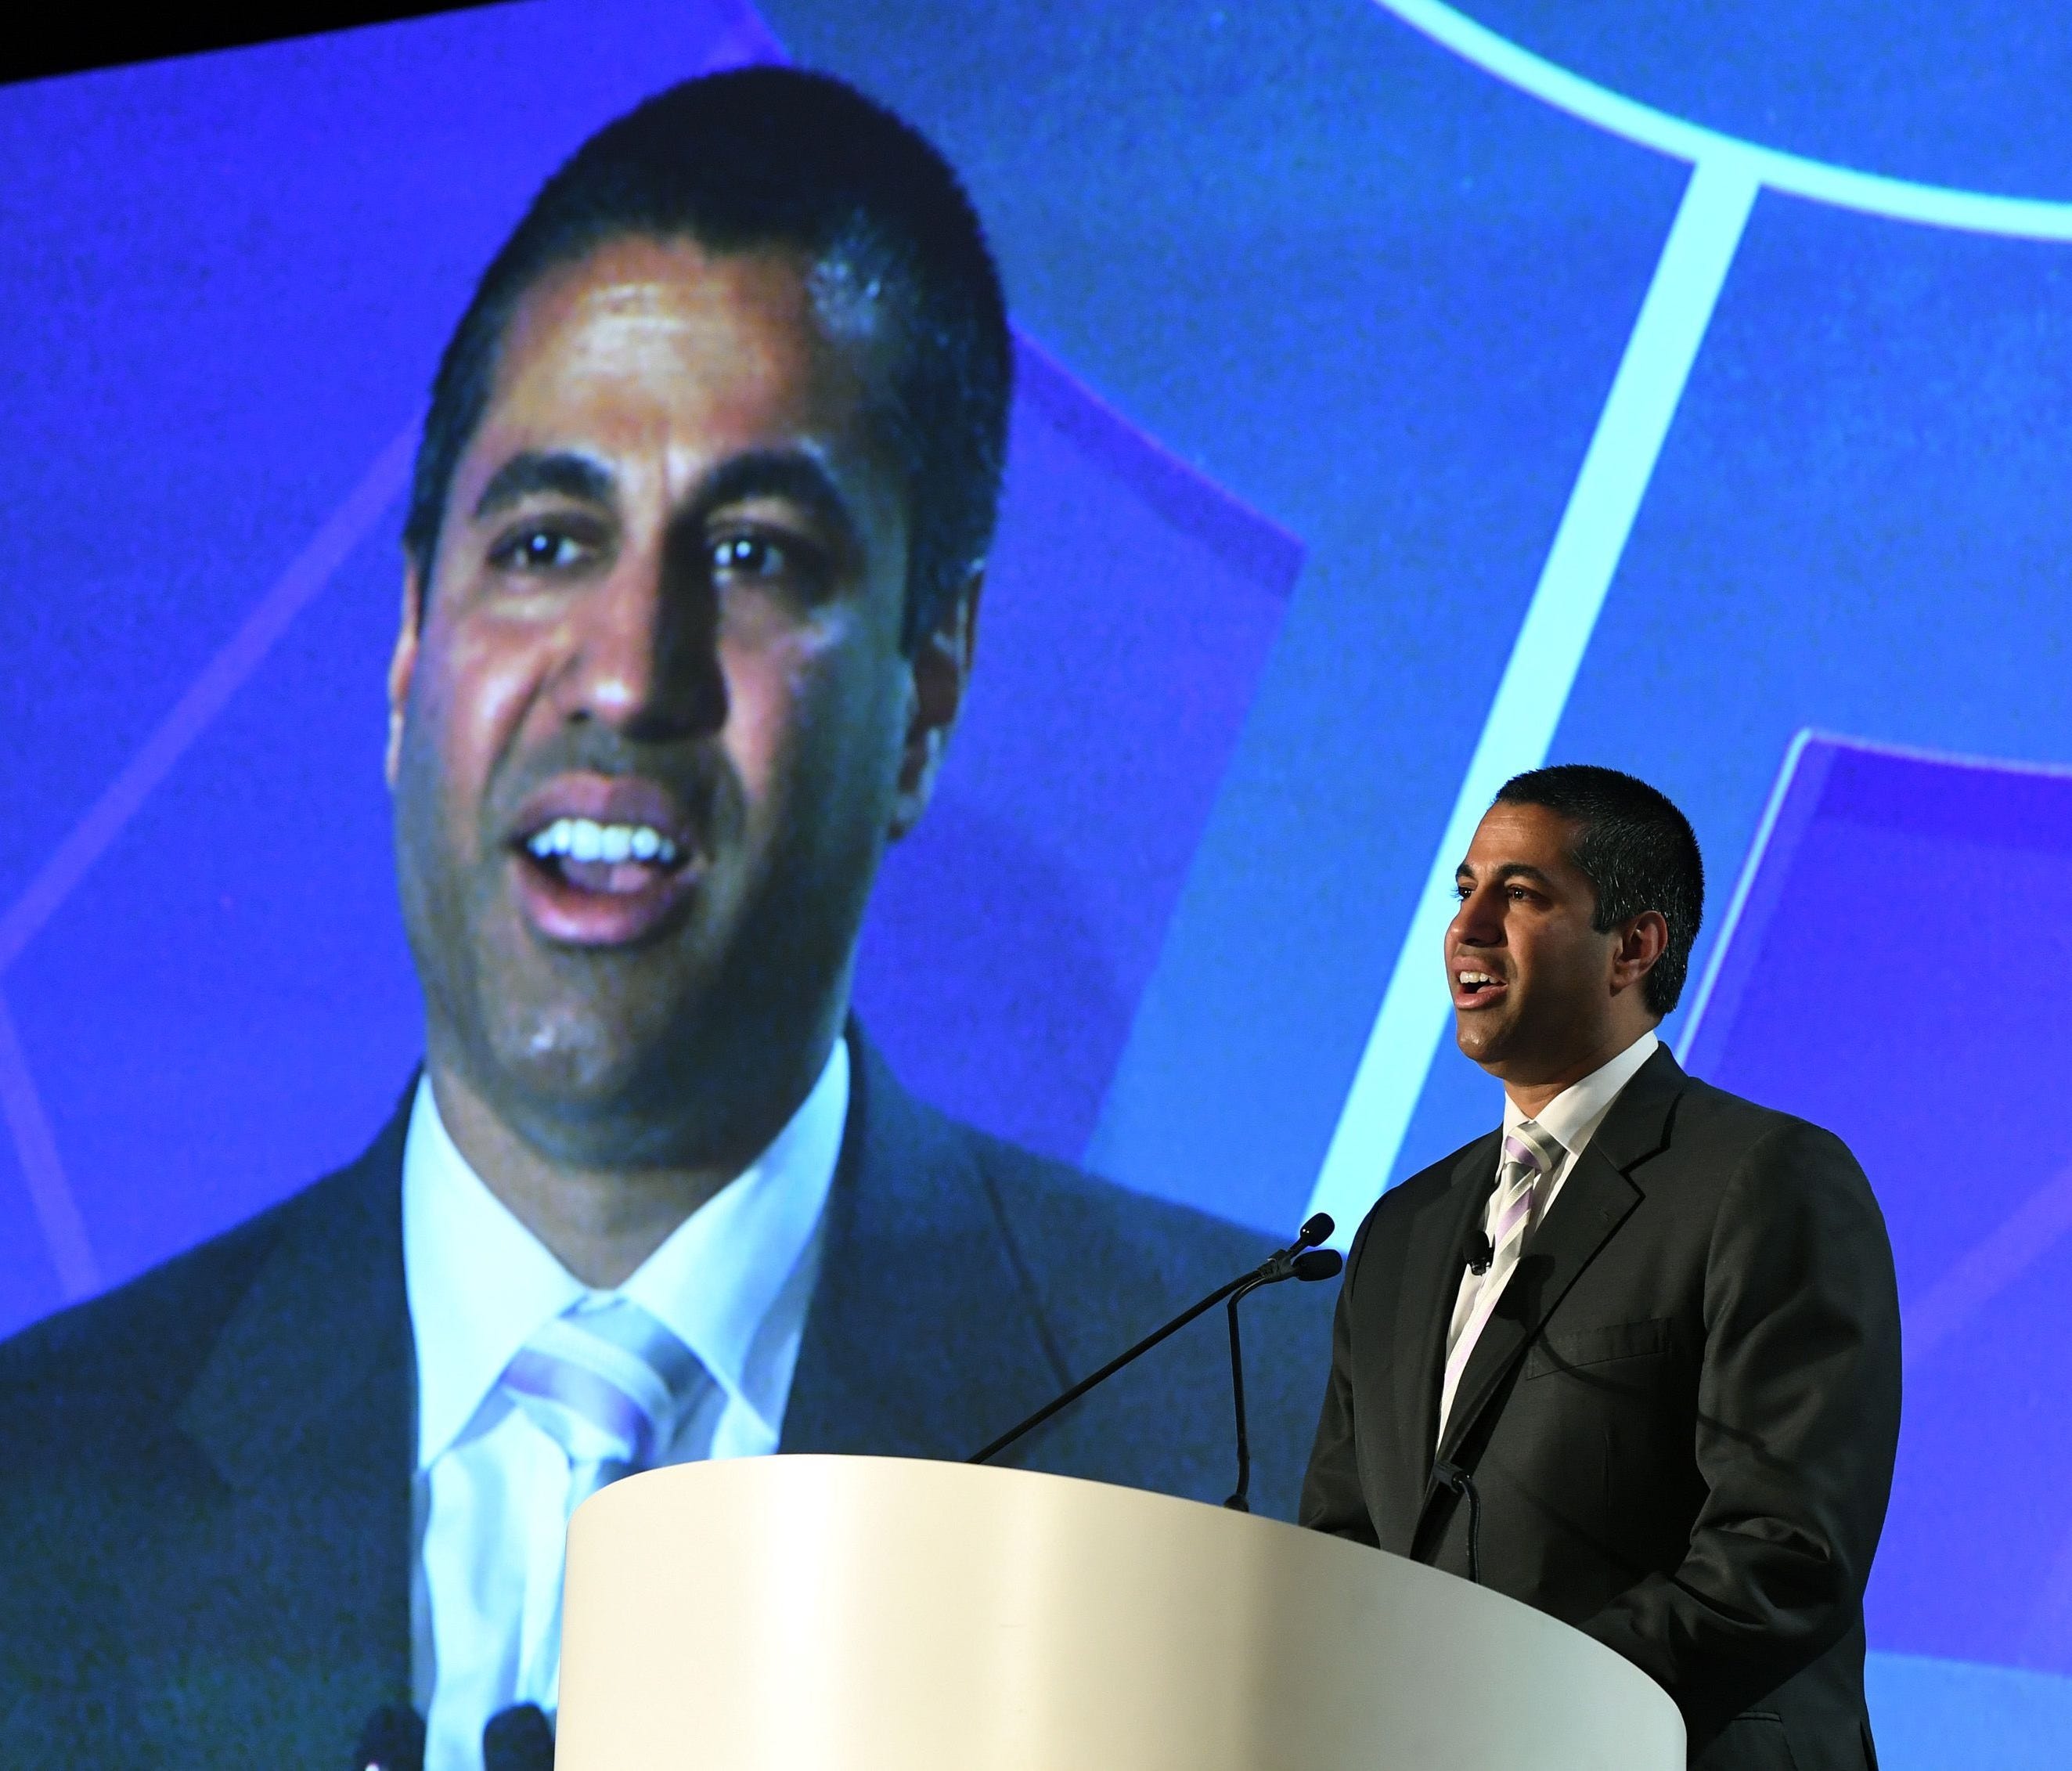 Federal Communications Commission Chairman Ajit Pai speaks during the 2017 NAB Show at the Las Vegas Convention Center on April 25, 2017 in Las Vegas, Nevada. The FCC chairman supports an overhaul of the net neutrality rules passed in 2015.